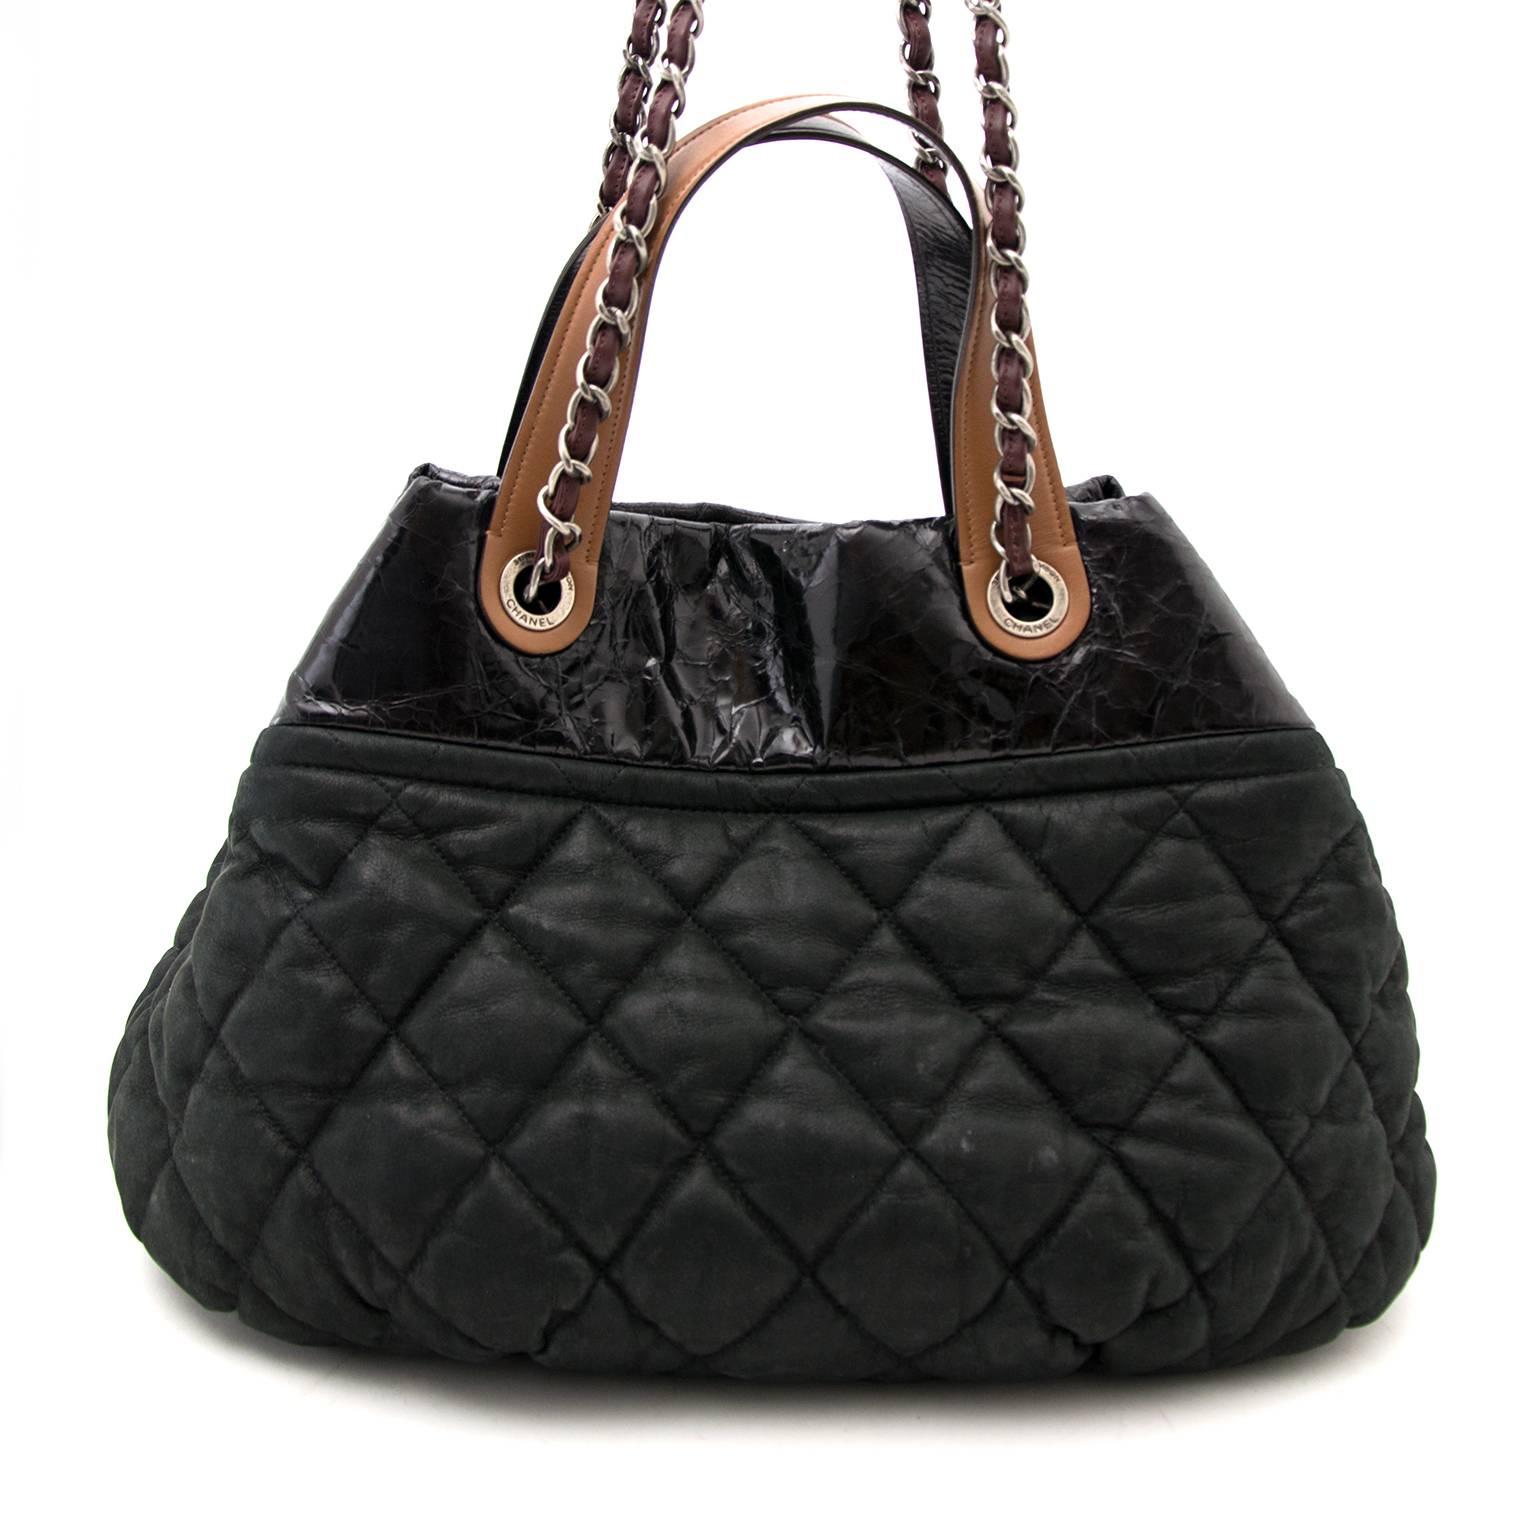 Chanel Black In The Mix Large Tote Bag
The Chanel In The Mix was first released during Chanel's Fall 2010 collection. 
The bottom has an interesting quilted base that appears wrinkly and a sturdy leather upper half.
 
This purse expands at the base